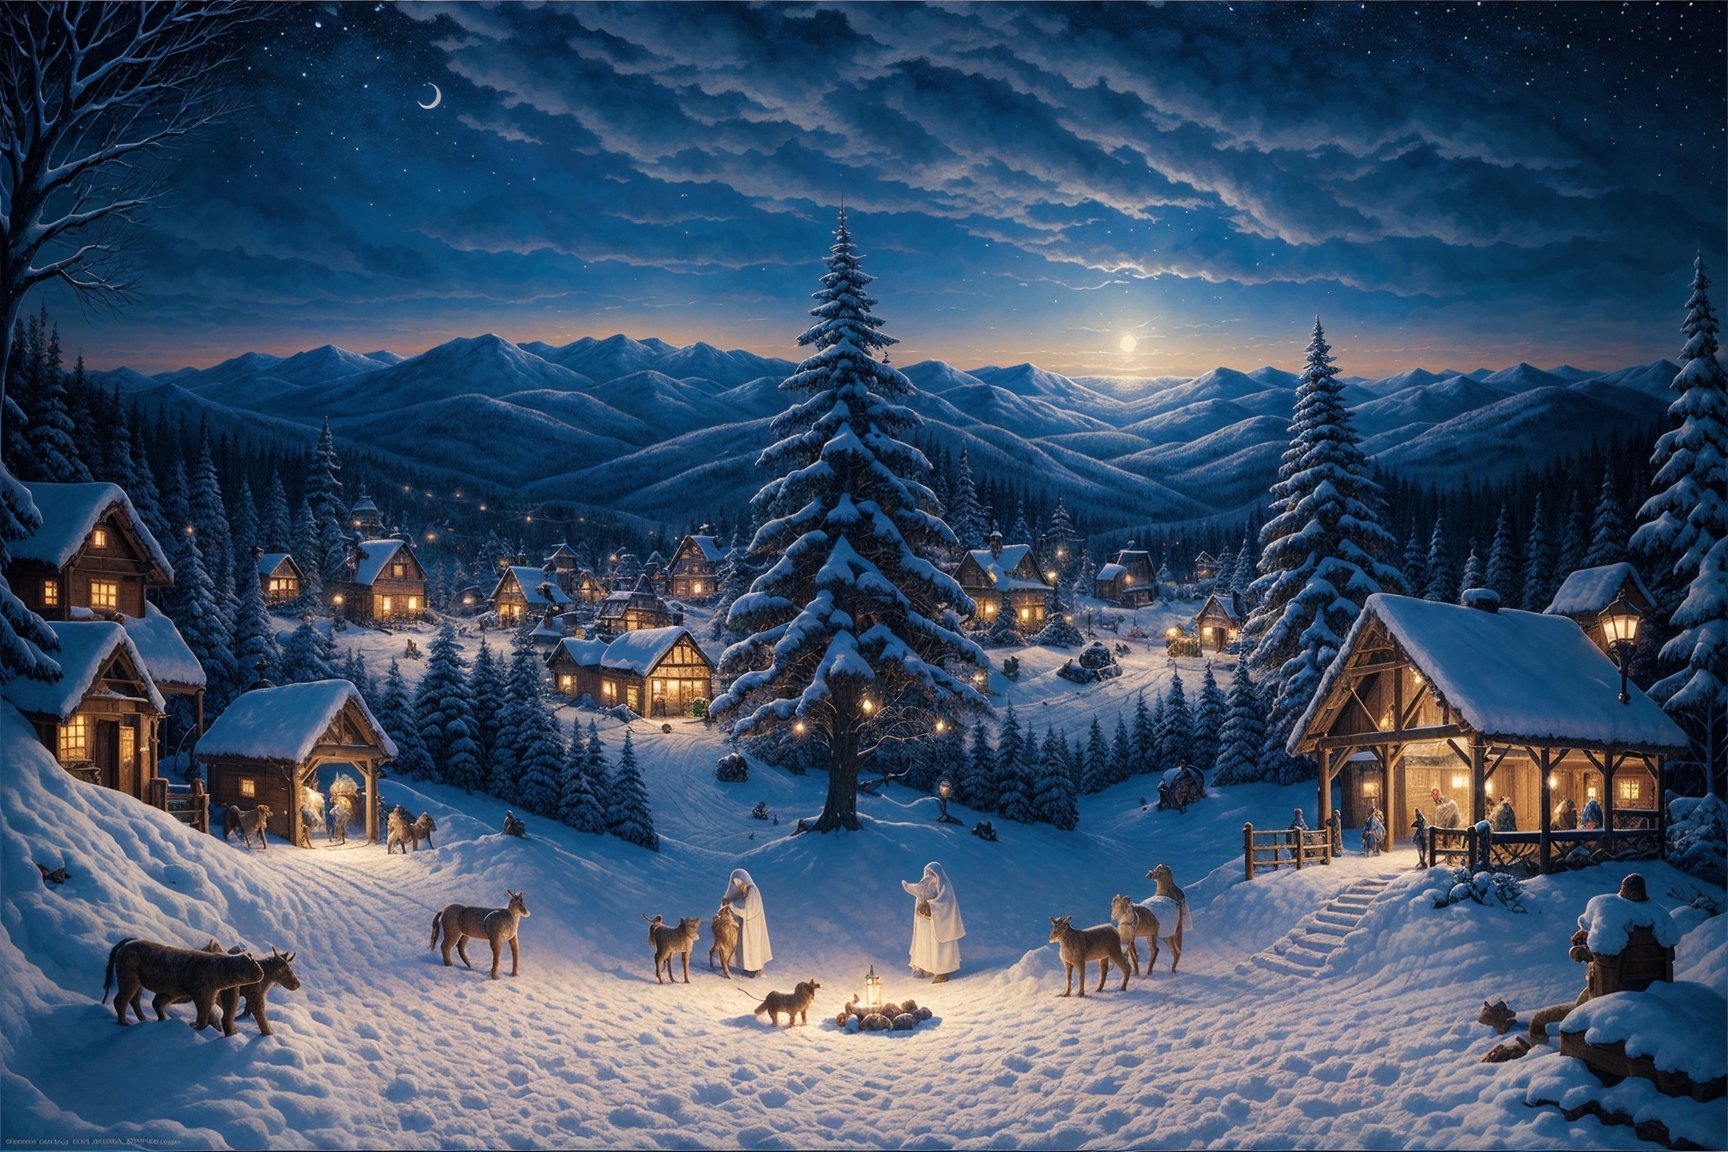 a holy night when Christ was born scenery
Masterpiece,ayaka_genshin,More Detail